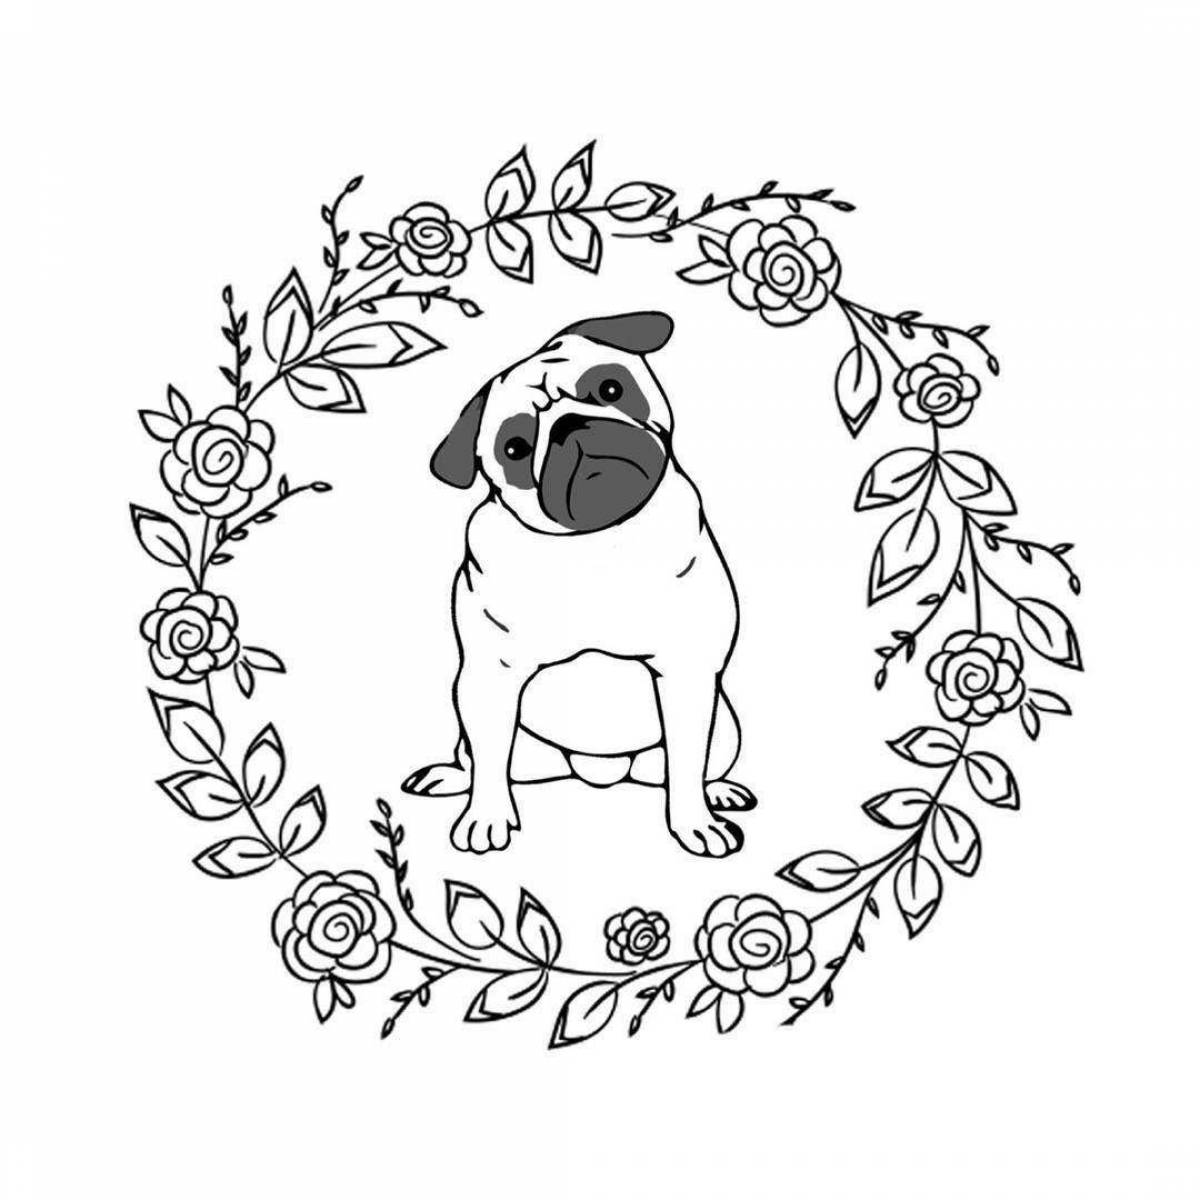 Outstanding pug coloring page for kids